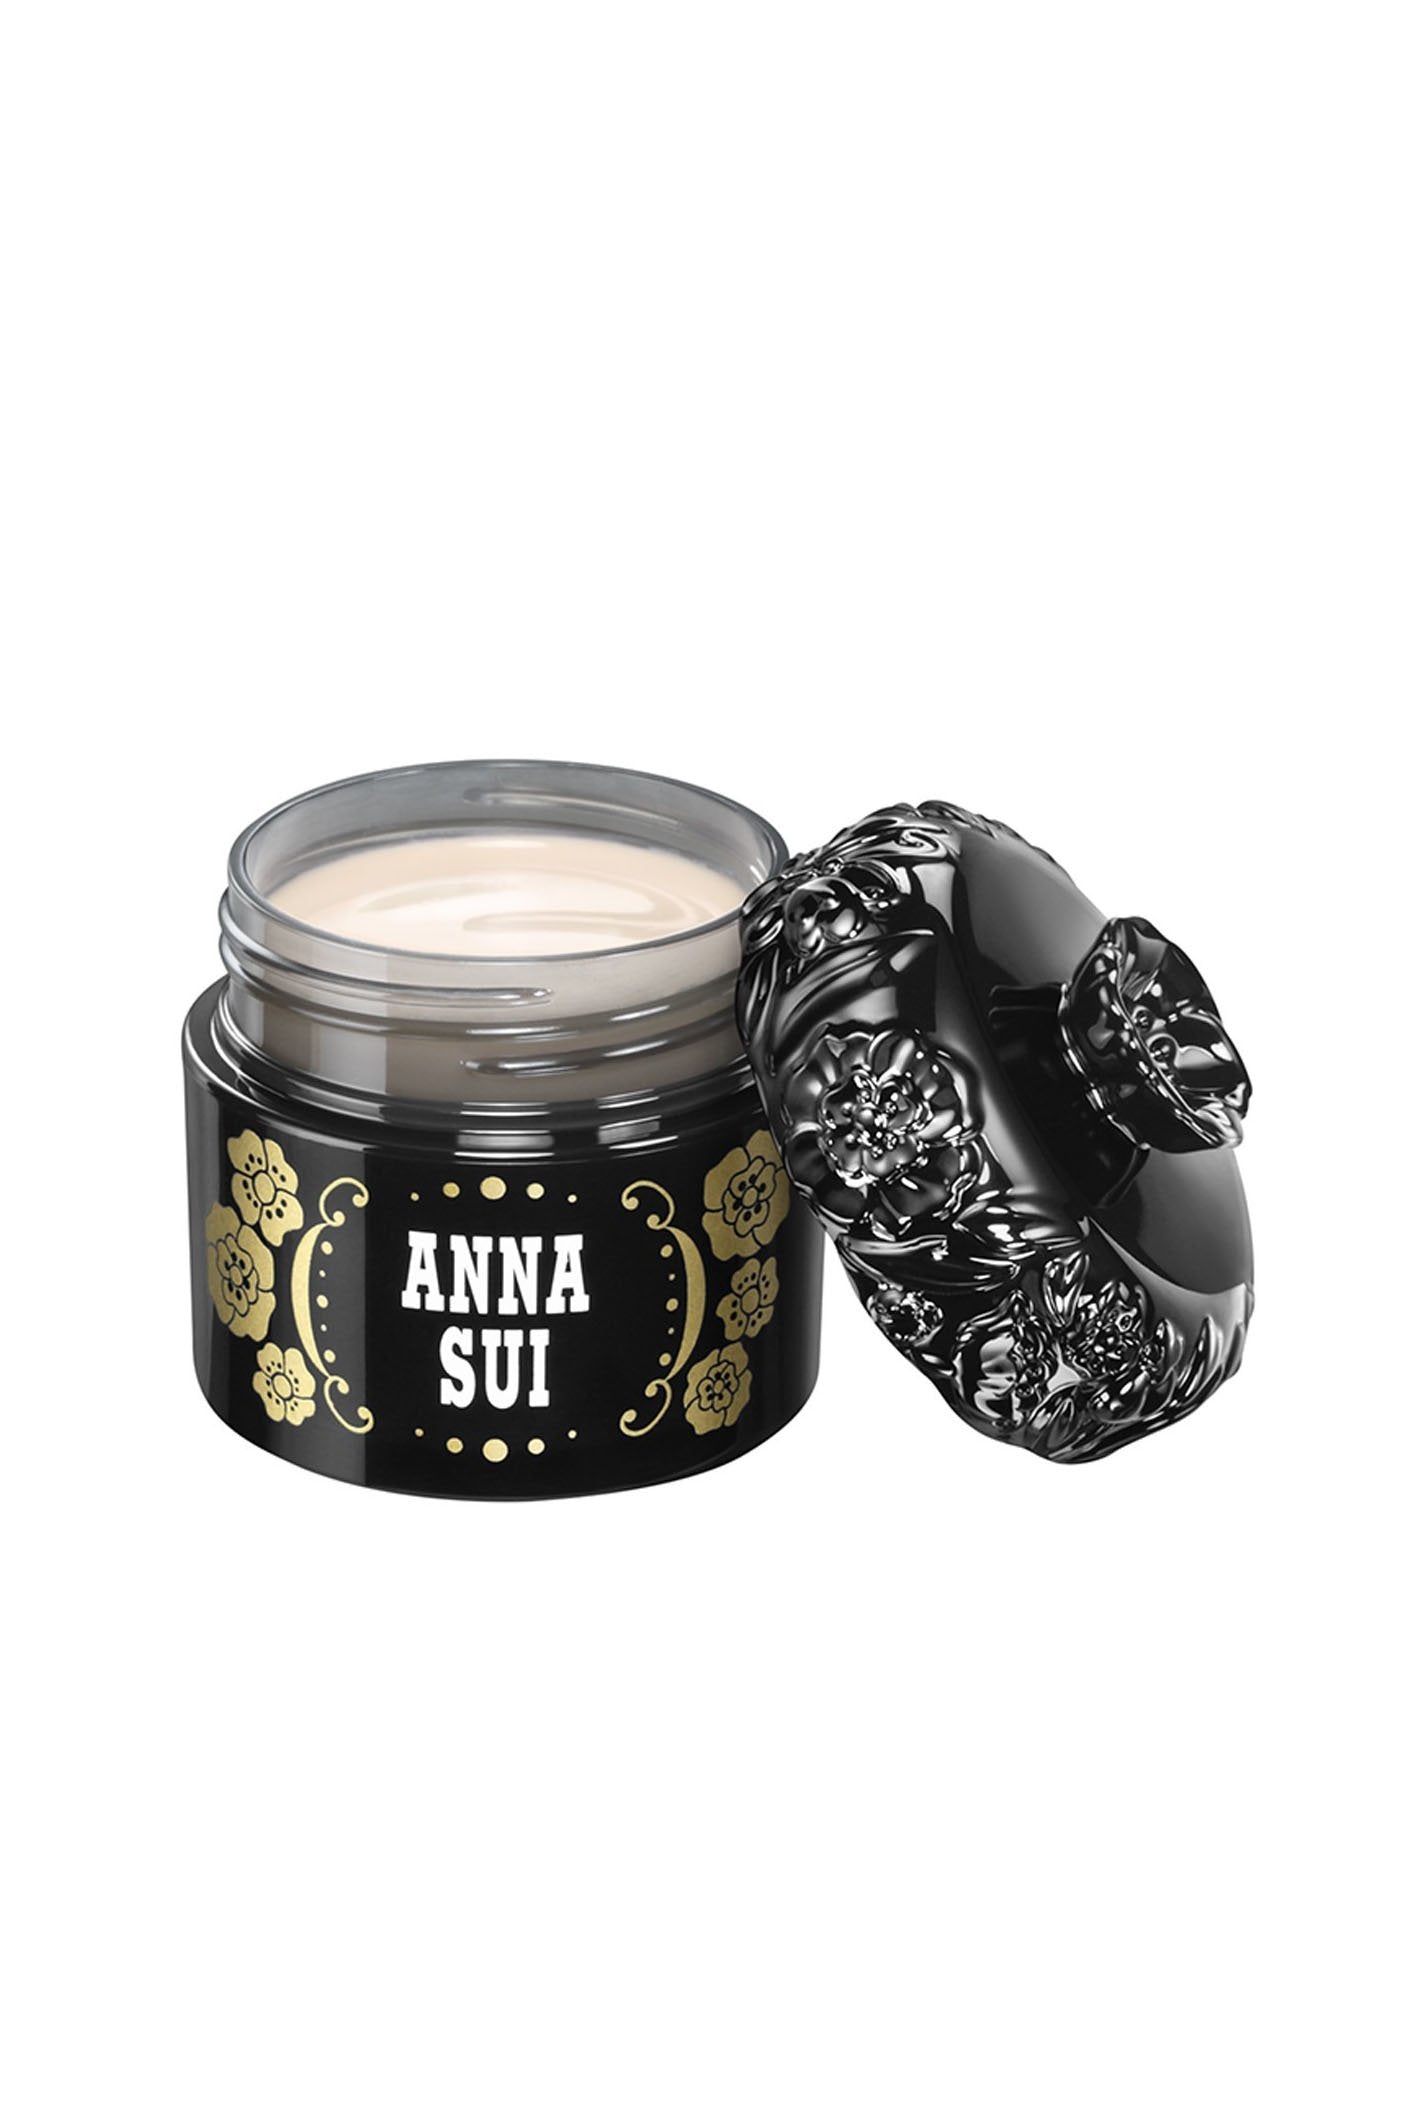 Black round case with a floral design and Anna Sui, raised rose pattern around, & a rose at the top